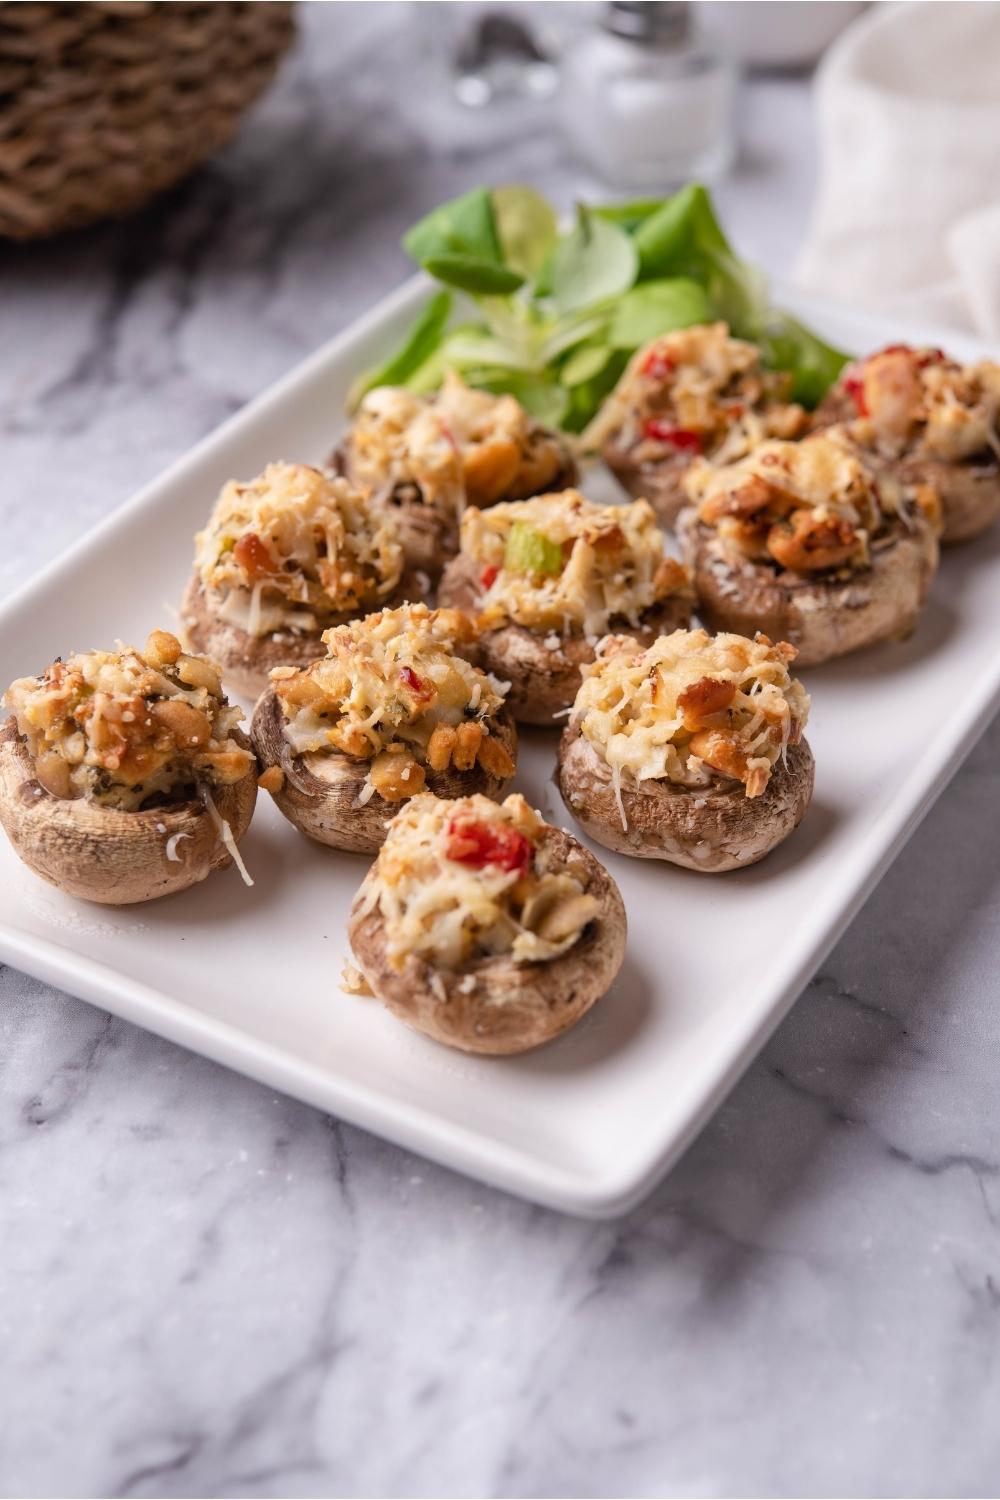 Red lobster crab stuffed mushrooms on a white plate with a garnish of greens.